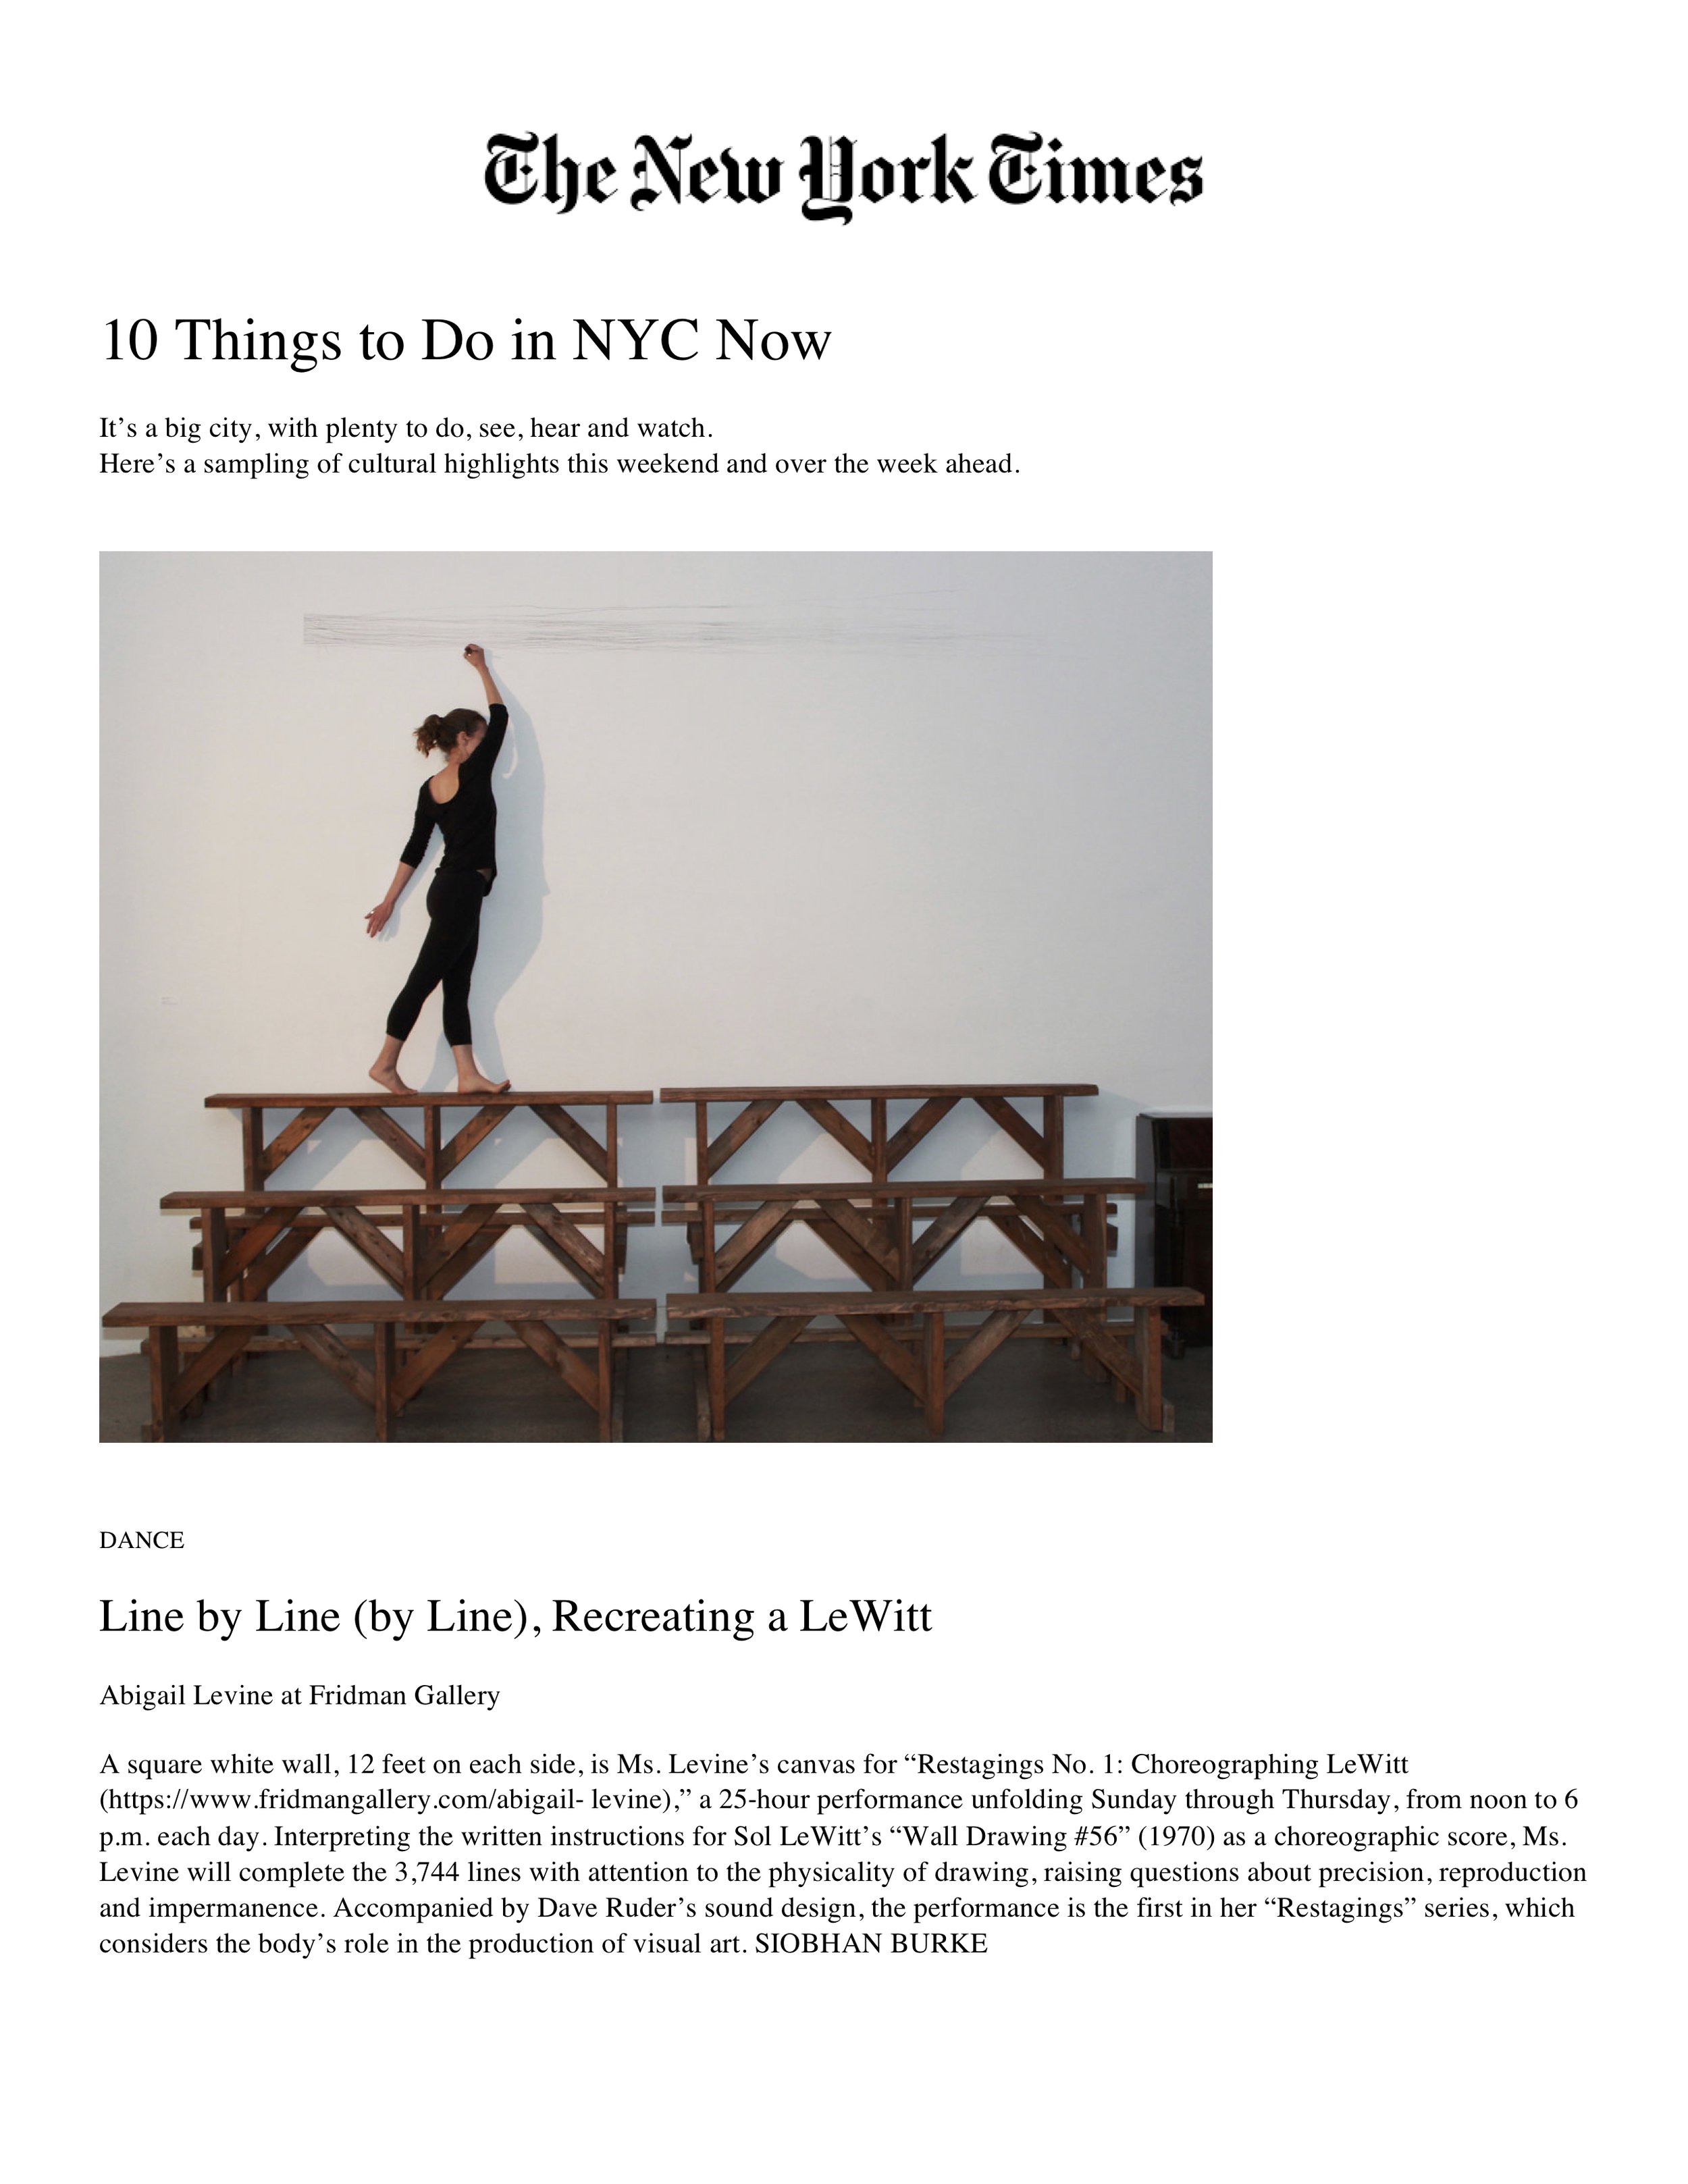 10 Things to Do in NYC Now.jpg